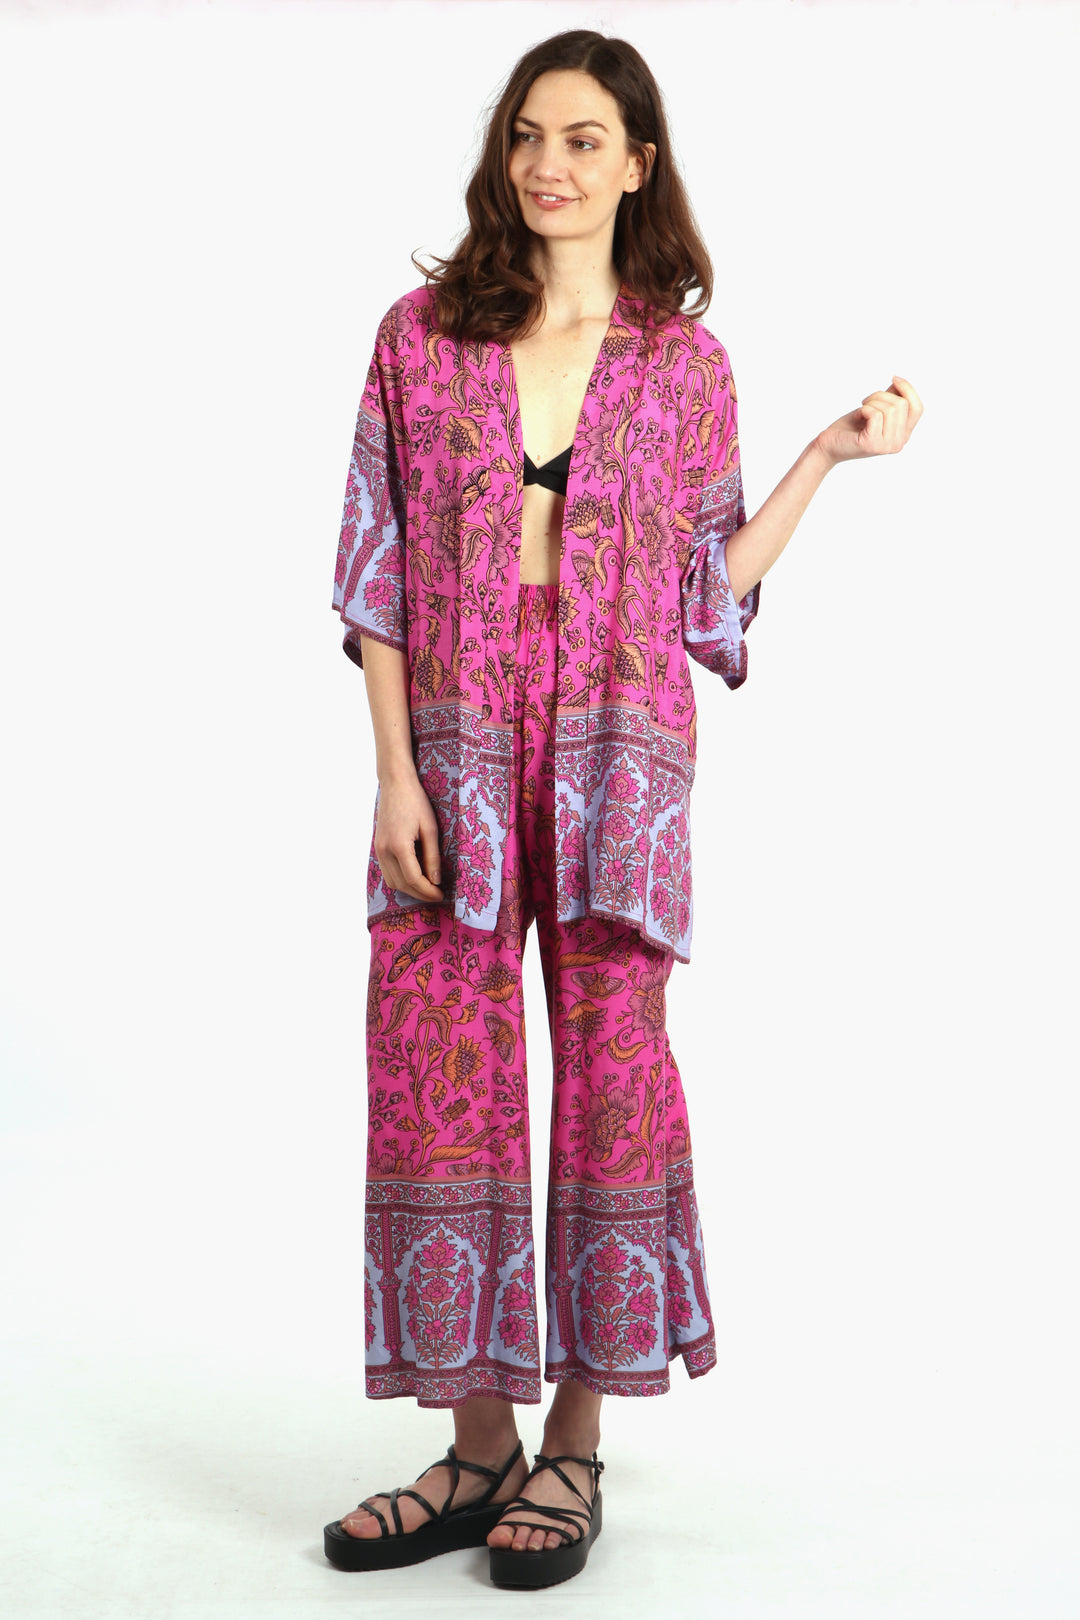 model wearing a hot pink ornate floral and butterfly pattern short kimono with matching palazzo pants